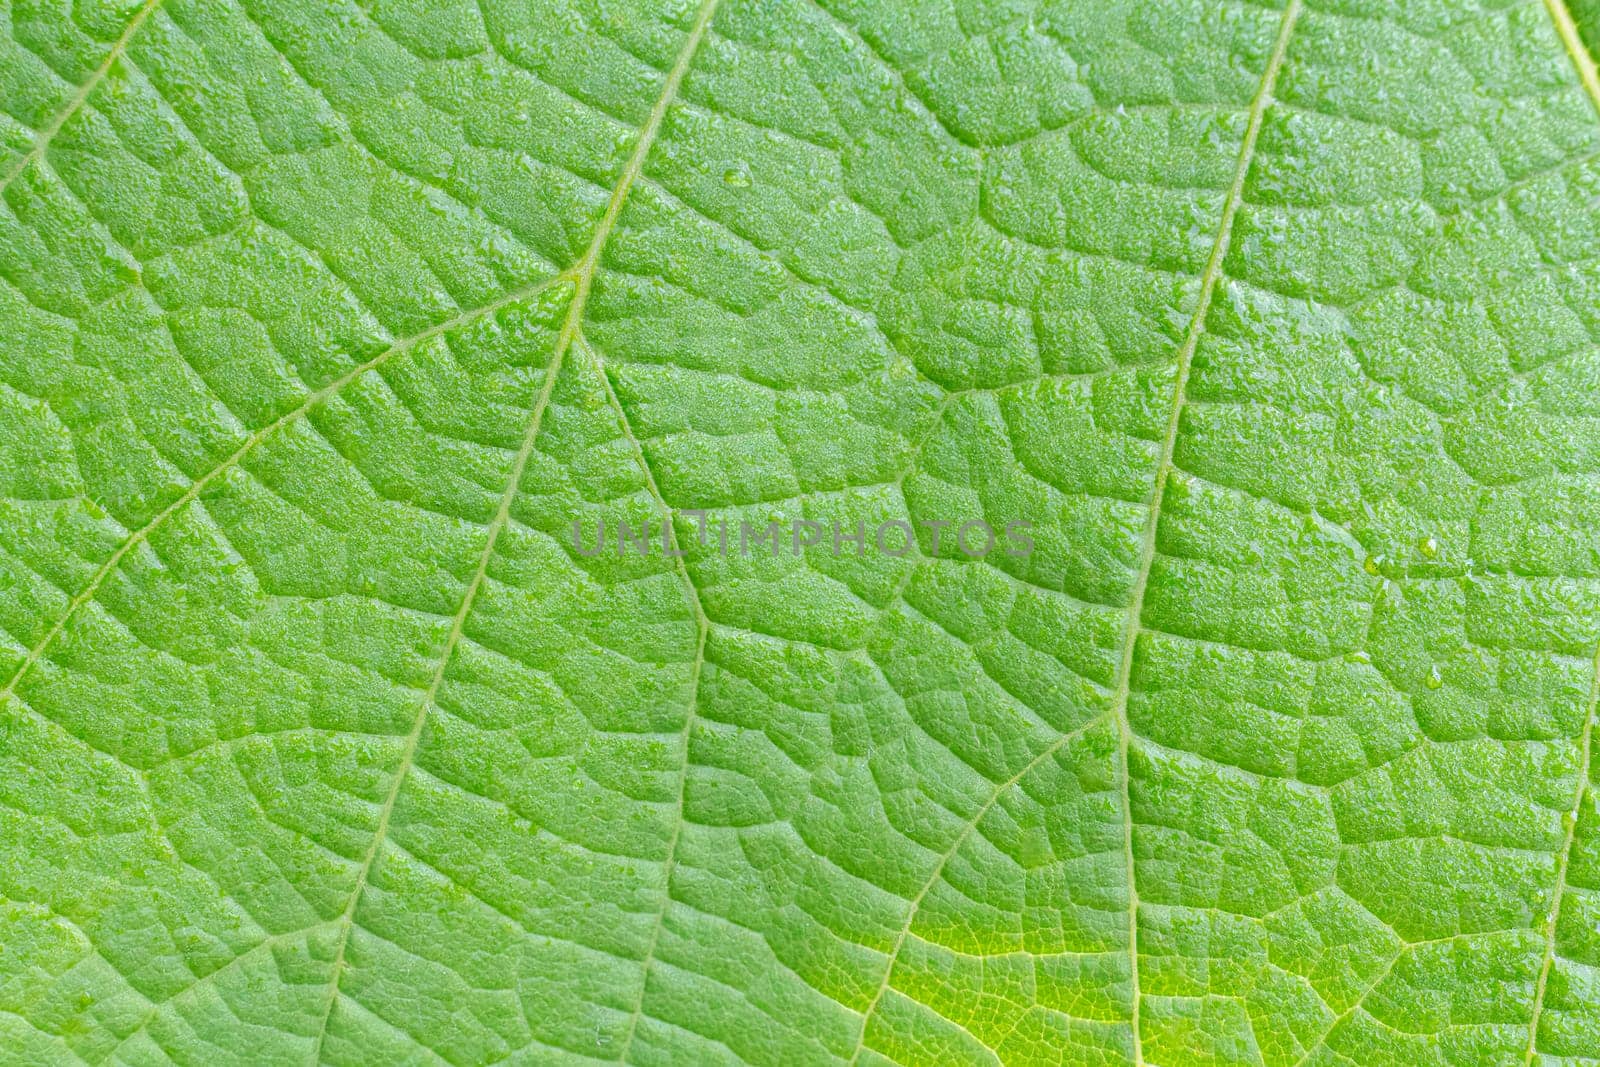 Close-up view of a green leaf with a natural pattern in daylight.